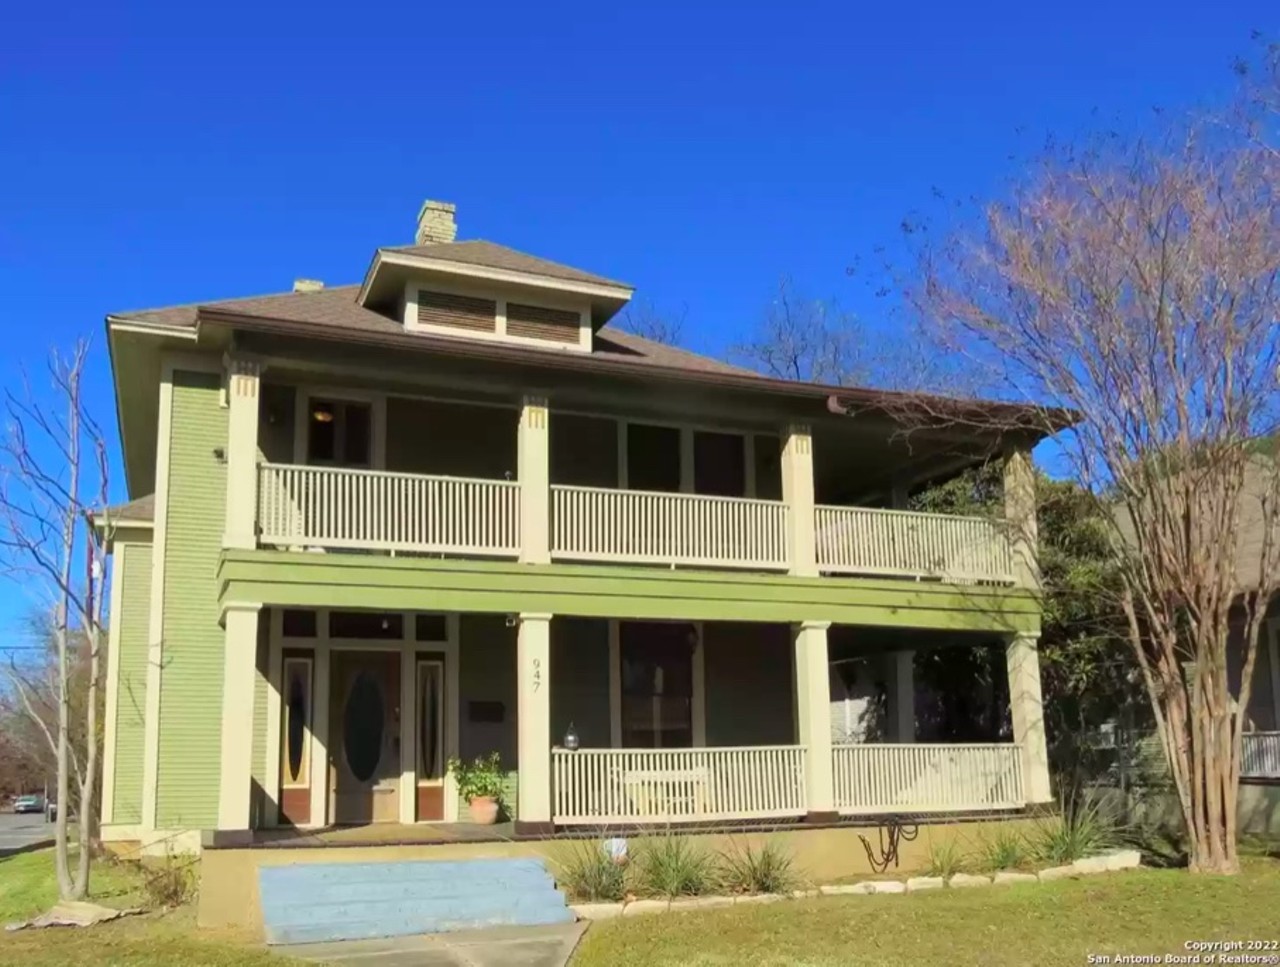 This two-story charmer was one of the first houses in San Antonio's Beacon Hill neighborhood